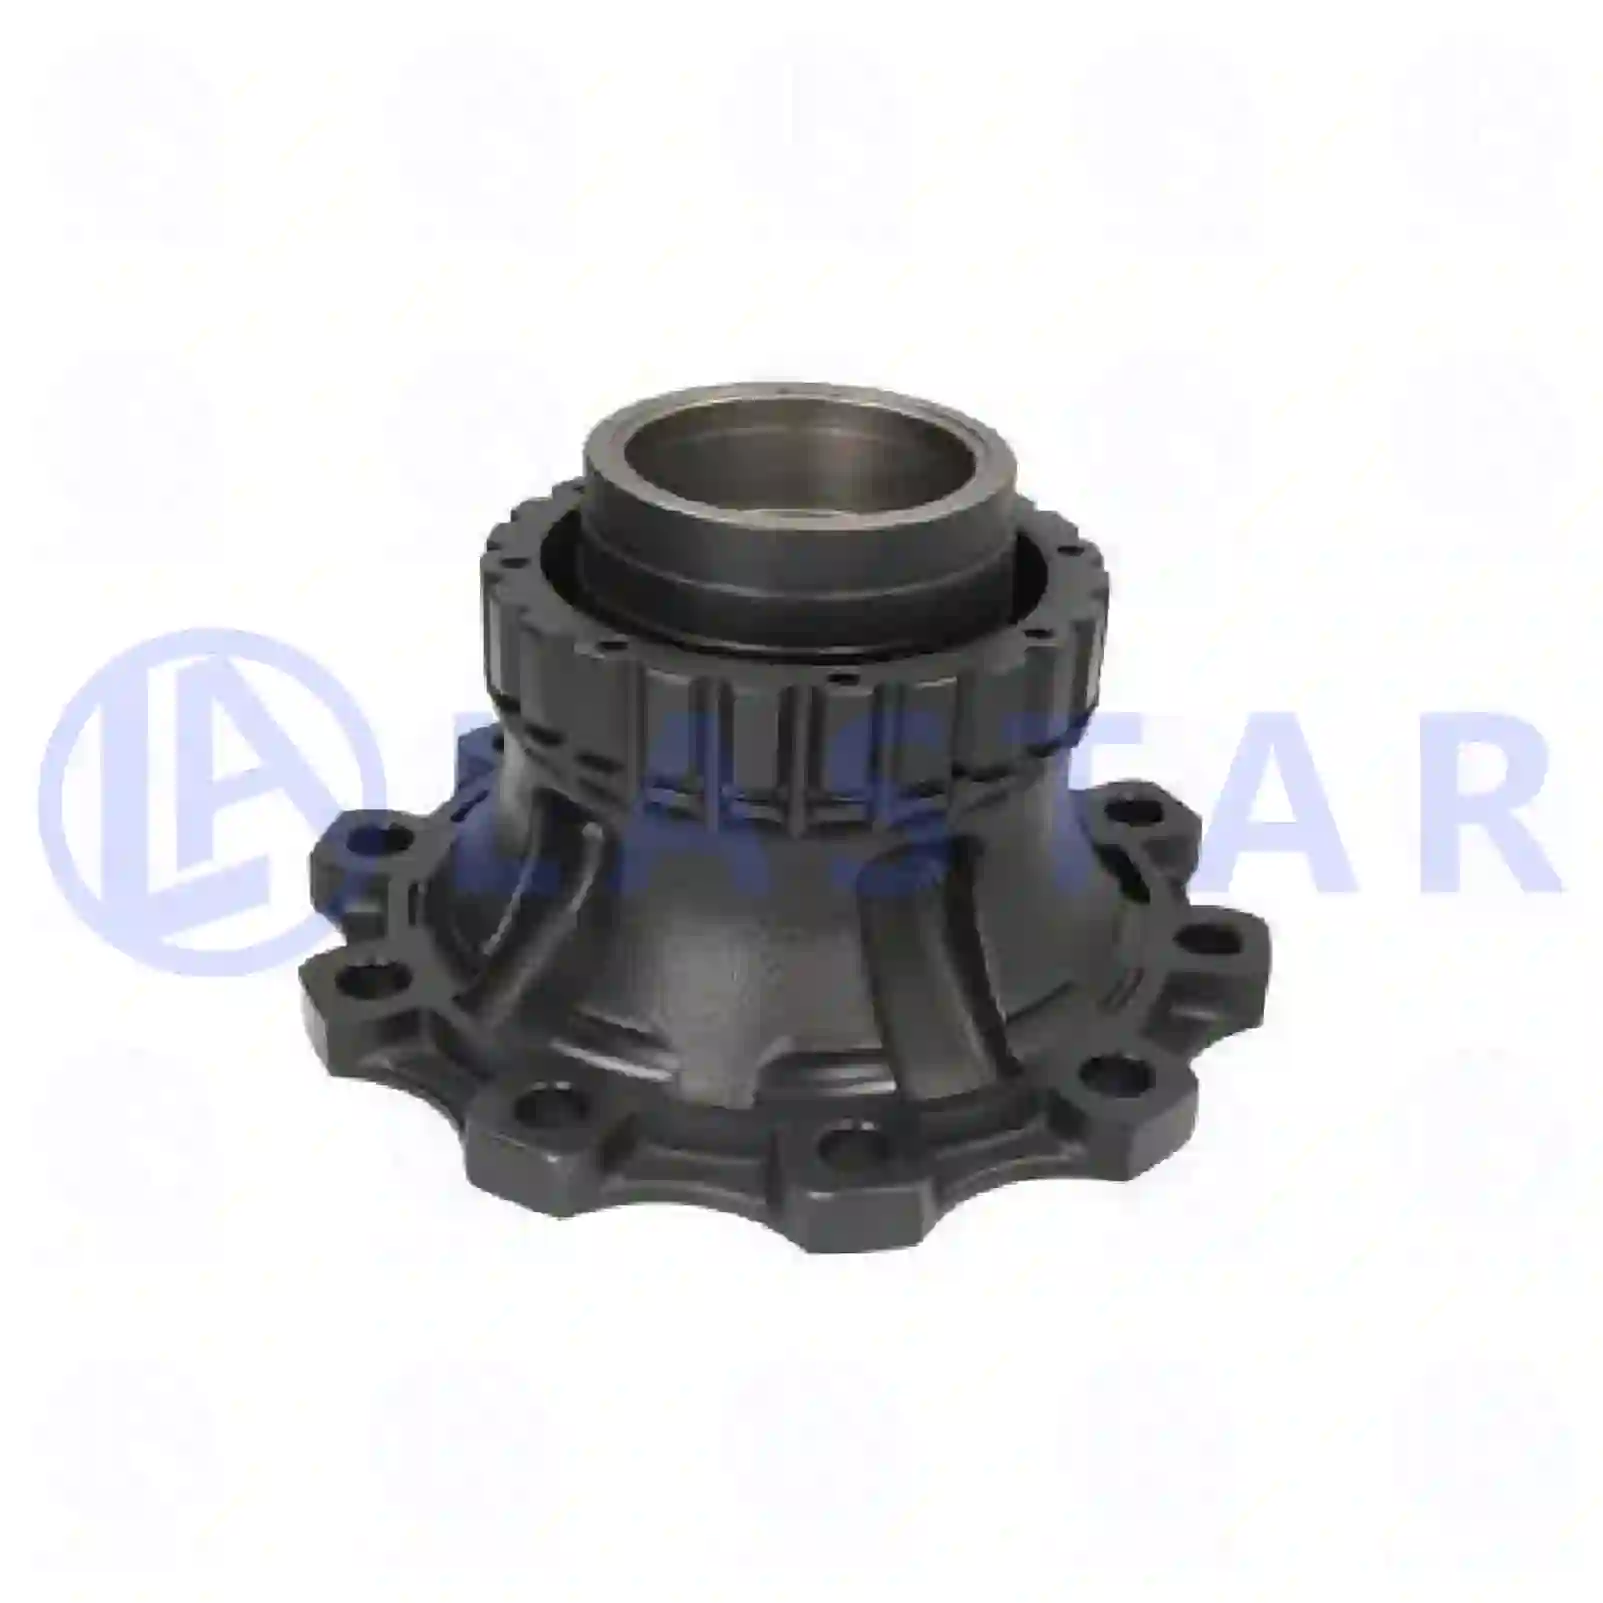 Hub Wheel hub, with bearing, without ABS ring, la no: 77726790 ,  oem no:7420535202S, 7421024206S, 7421116569S, 7485114470S, 20535202S, 21024206S, 21116389S, 21116569S, 21116584S1, 21940776, 85107750S, 85111448S, 85111791S, 85114470S, ZG30216-0008 Lastar Spare Part | Truck Spare Parts, Auotomotive Spare Parts